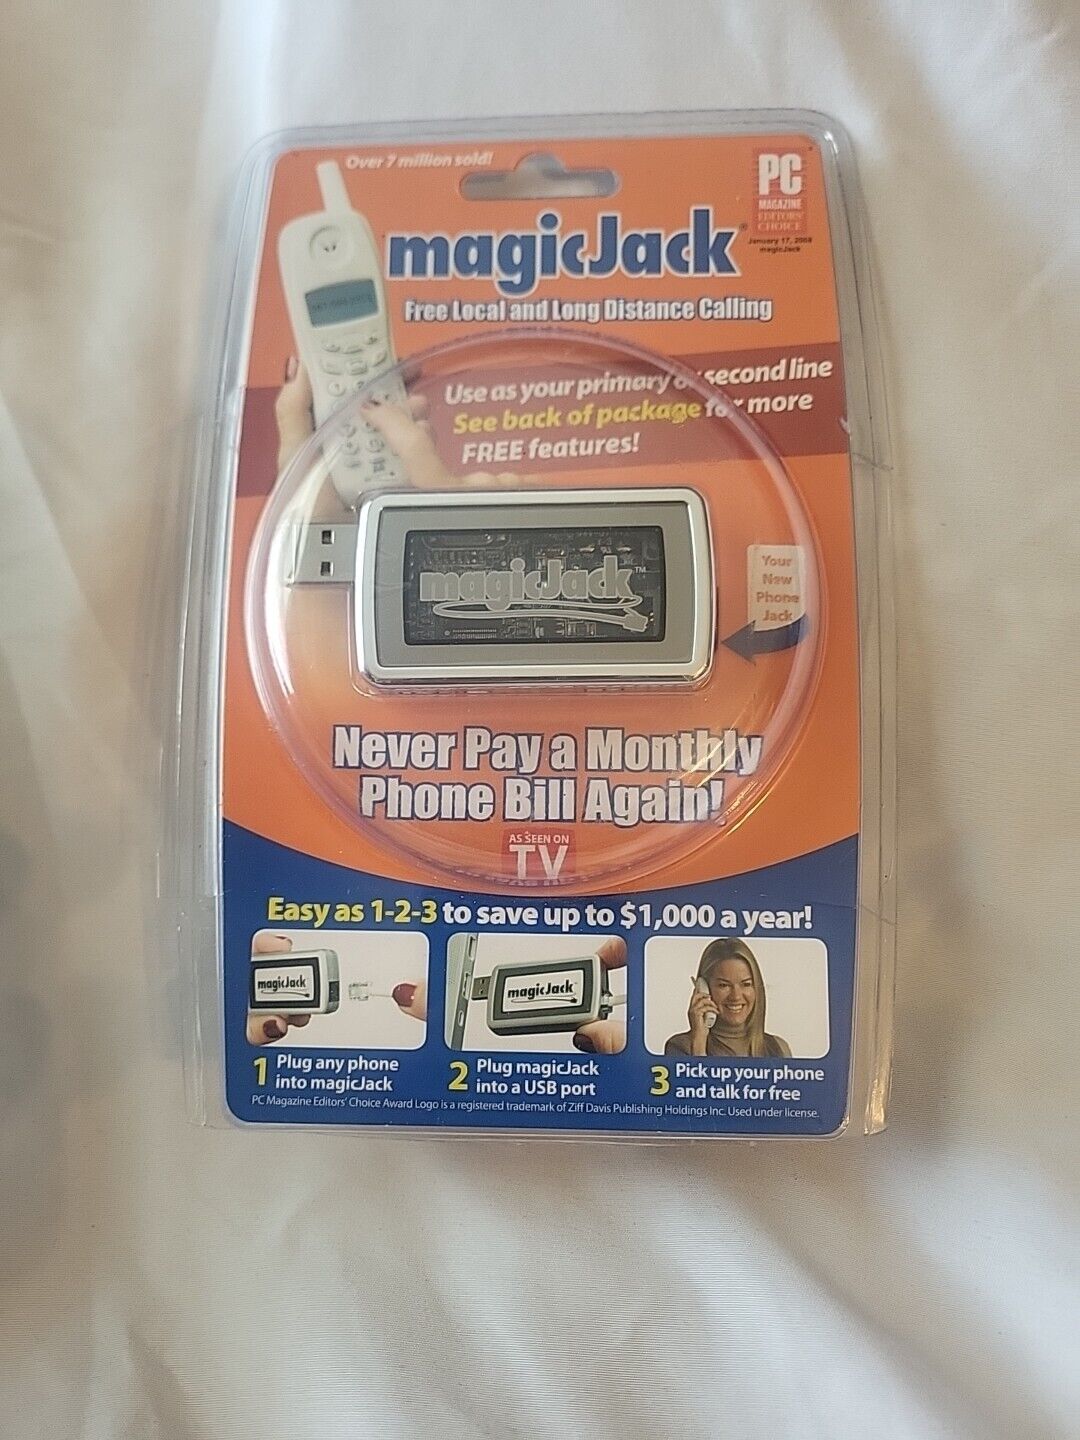 Open Box New Magic Jack, But Is Missing Phone Line 